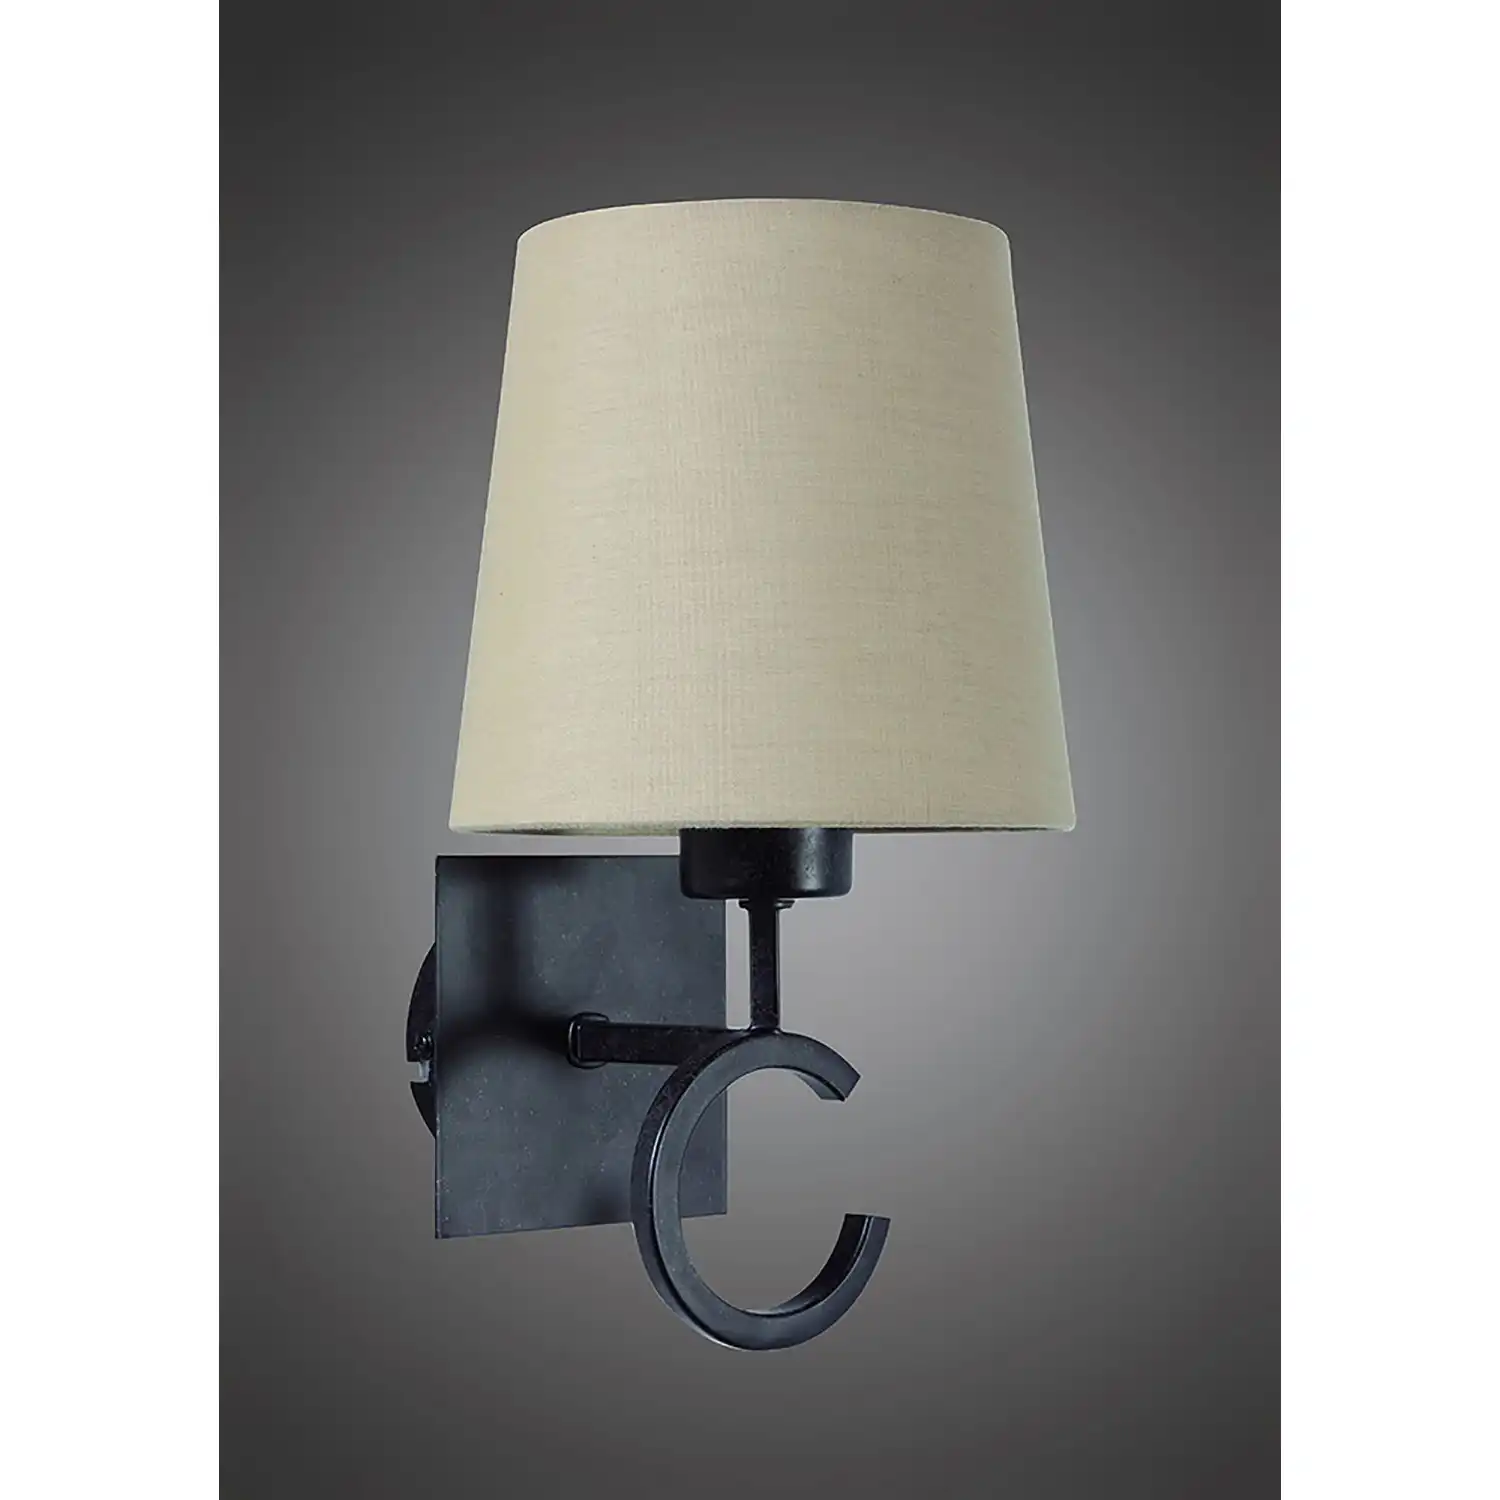 Argi Wall Lamp 1 Light E27 With Taupe Shade Brown Oxide